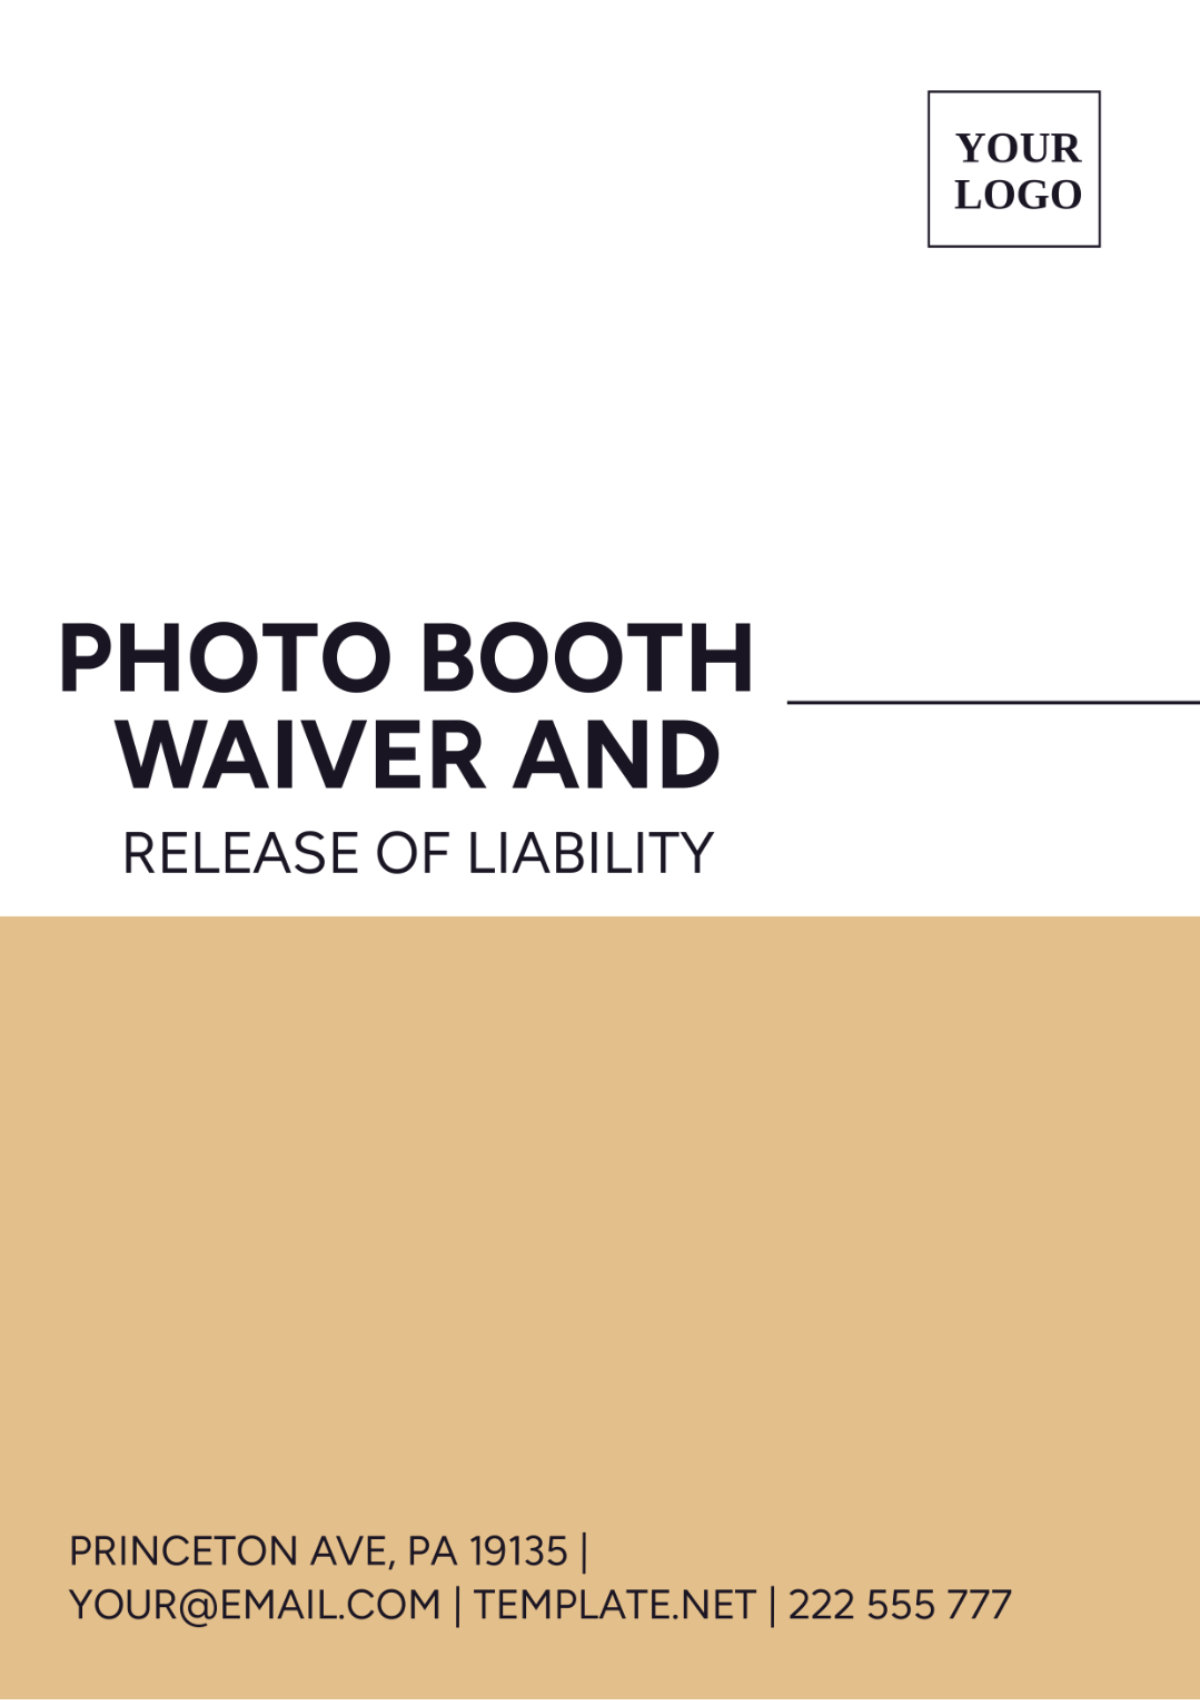 Photo Booth Waiver And Release Of Liability Template